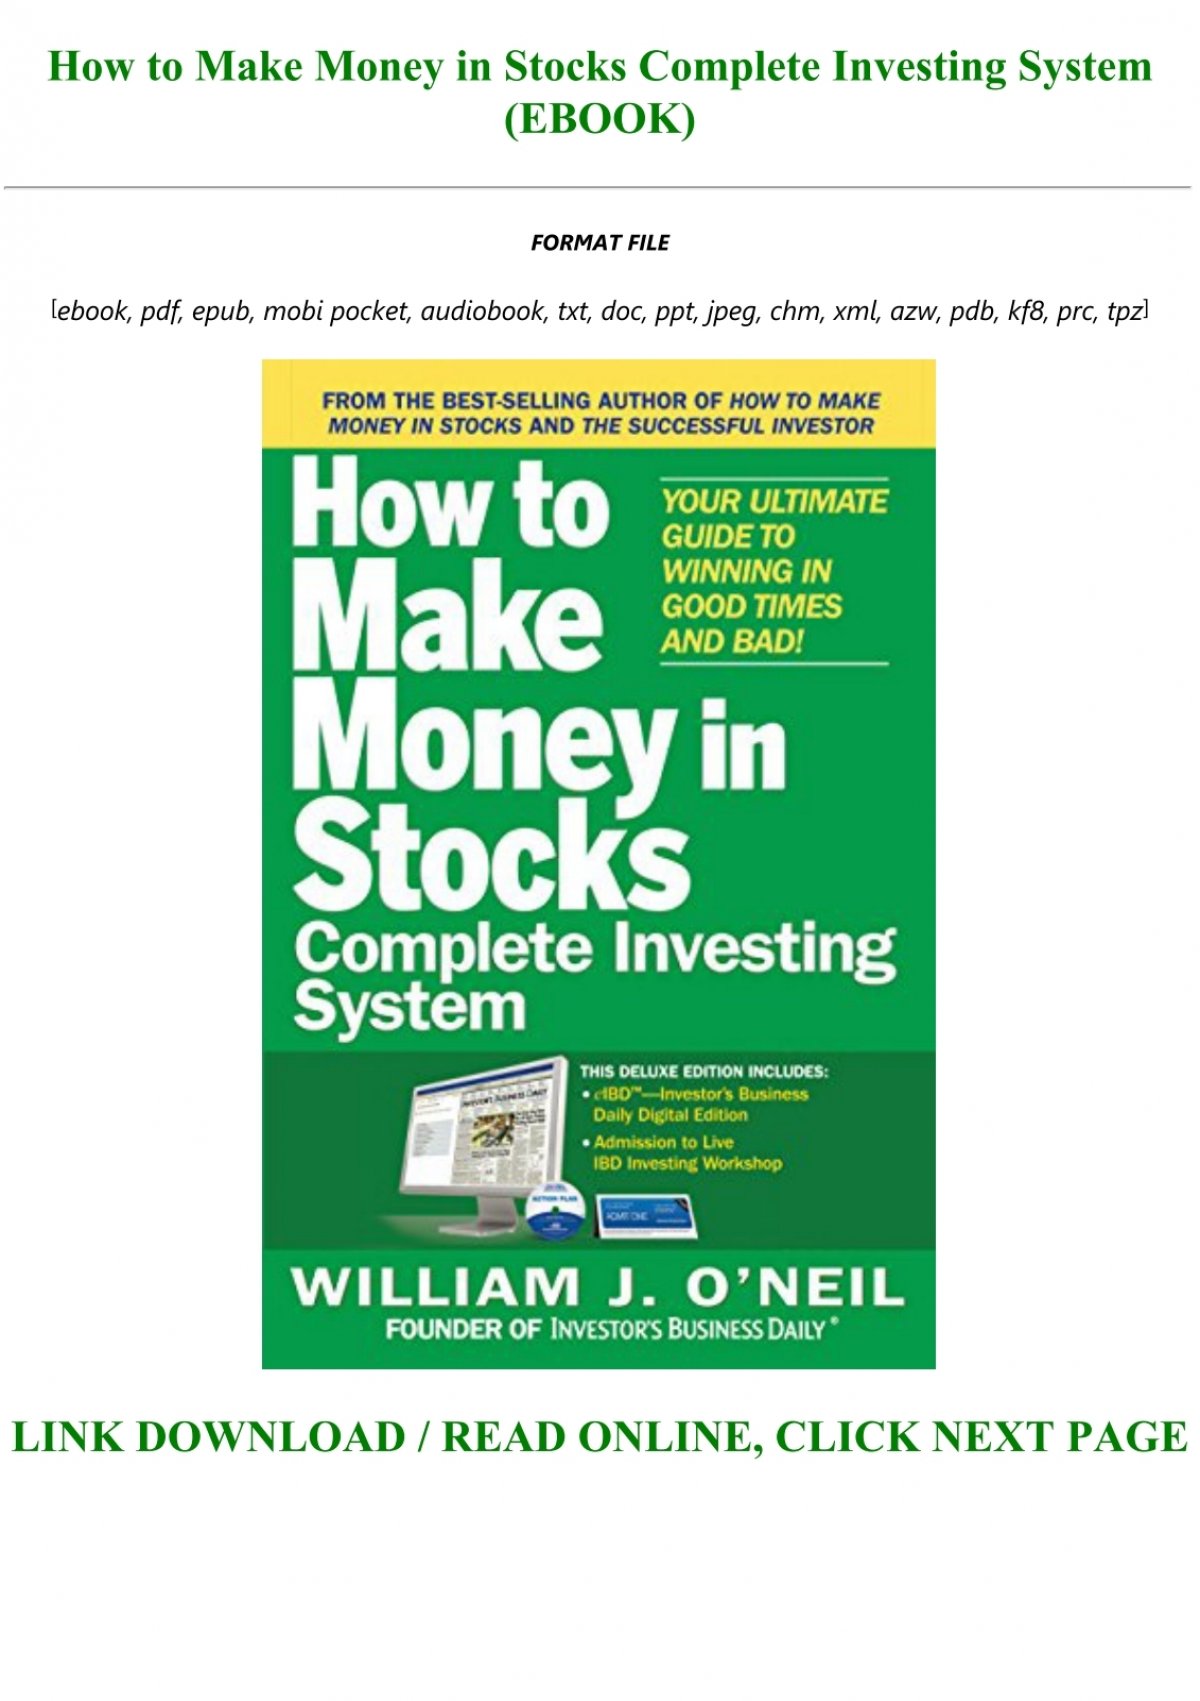 cons of investing in stocks - Money|Stocks|Stock|System|Book|Market|Trading|Books|Guide|Times|Day|Der|Download|Investors|Edition|Investor|Description|Pdf|Format|Epub|O'neil|Die|Strategies|Strategy|Mit|Investing|Dummies|Risk|Gains|Business|Man|Investment|Years|World|Wie|Action|Charts|William|Dad|Plan|Good Times|Stock Market|Ultimate Guide|Mobi Format|Full Book|Day Trading|National Bestseller|Successful Investing|Rich Dad|Seven-Step Process|Maximizing Gains|Major Study|American Association|Individual Investors|Mutual Funds|Book Description|Download Book Description|Handbuch Des|Stock Market Winners|12-Year Study|Leading Investment Strategies|Top-Performing Strategy|System-You Get|Easy Steps|Daily Resource|Big Winners|Market Rally|Big Losses|Market Downturn|Canslim Method